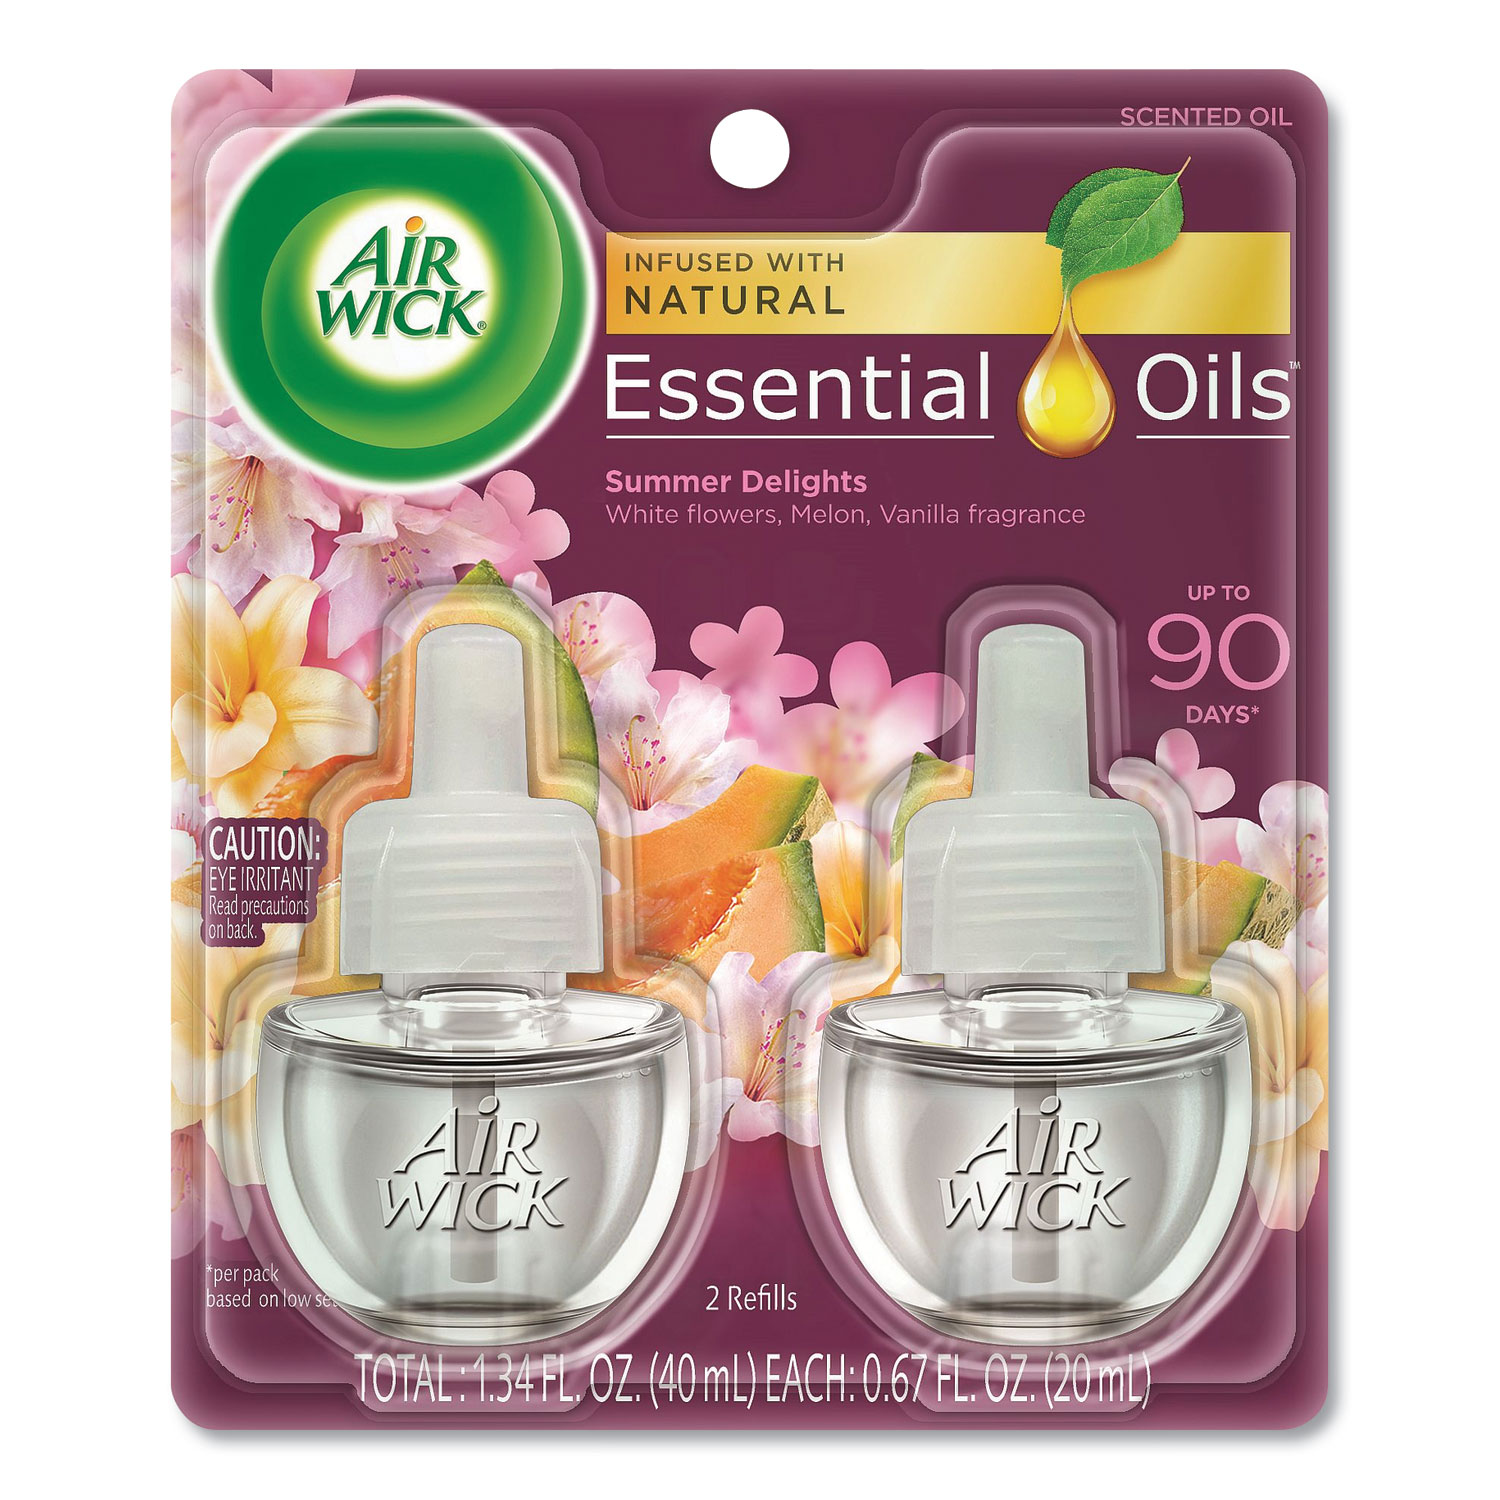  Air Wick 62338-91112 Life Scents Scented Oil Refills, Summer Delights, 0.67 oz, 2/Pack, 6 Packs/Carton (RAC91112) 